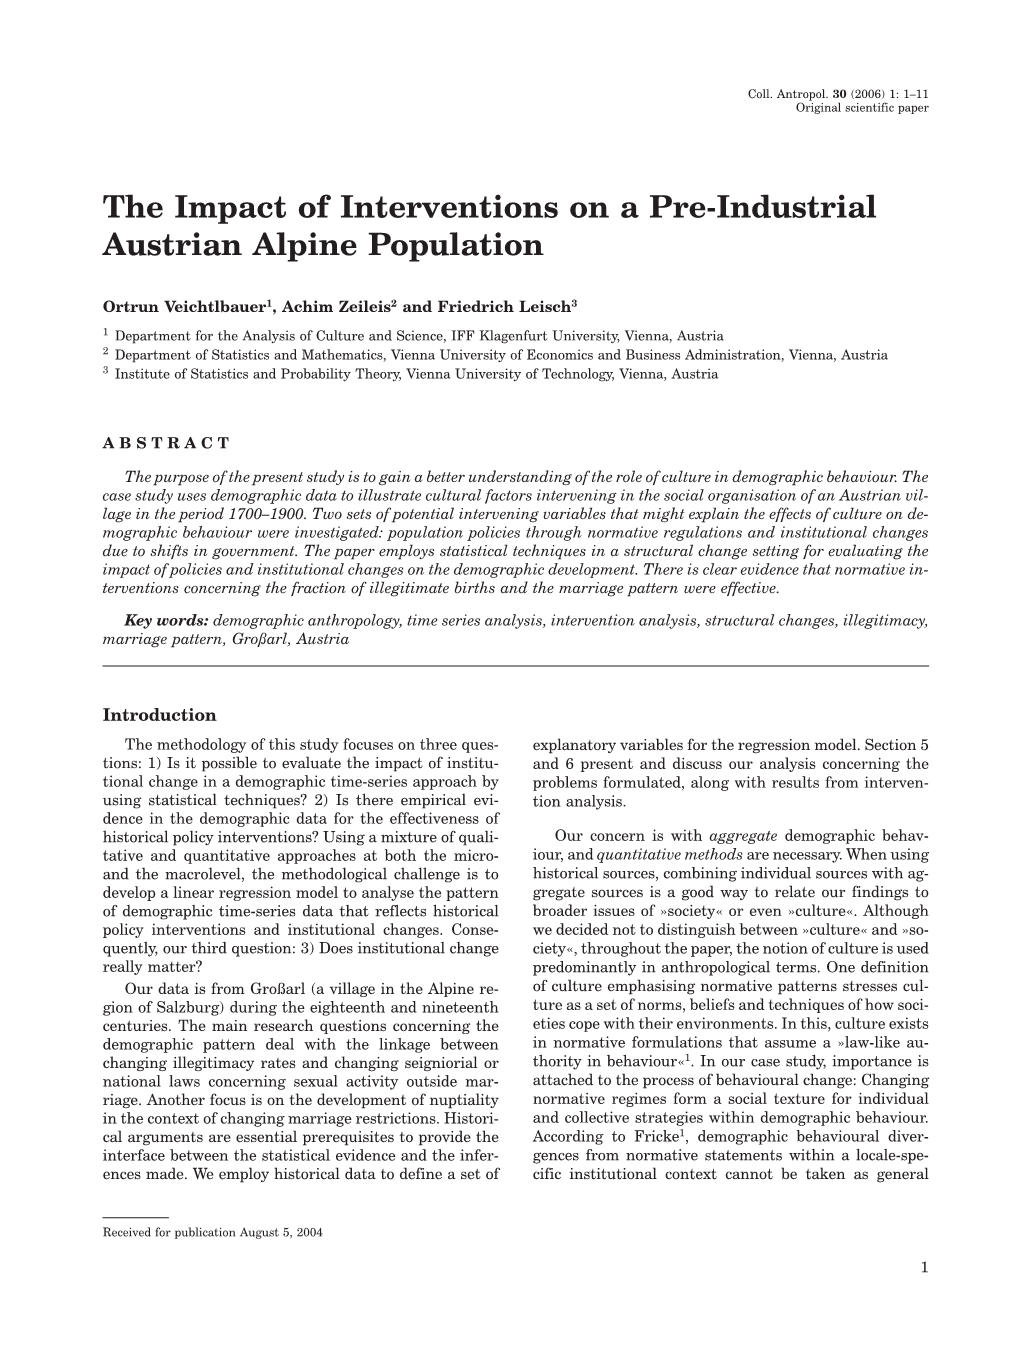 The Impact of Interventions on a Pre-Industrial Austrian Alpine Population